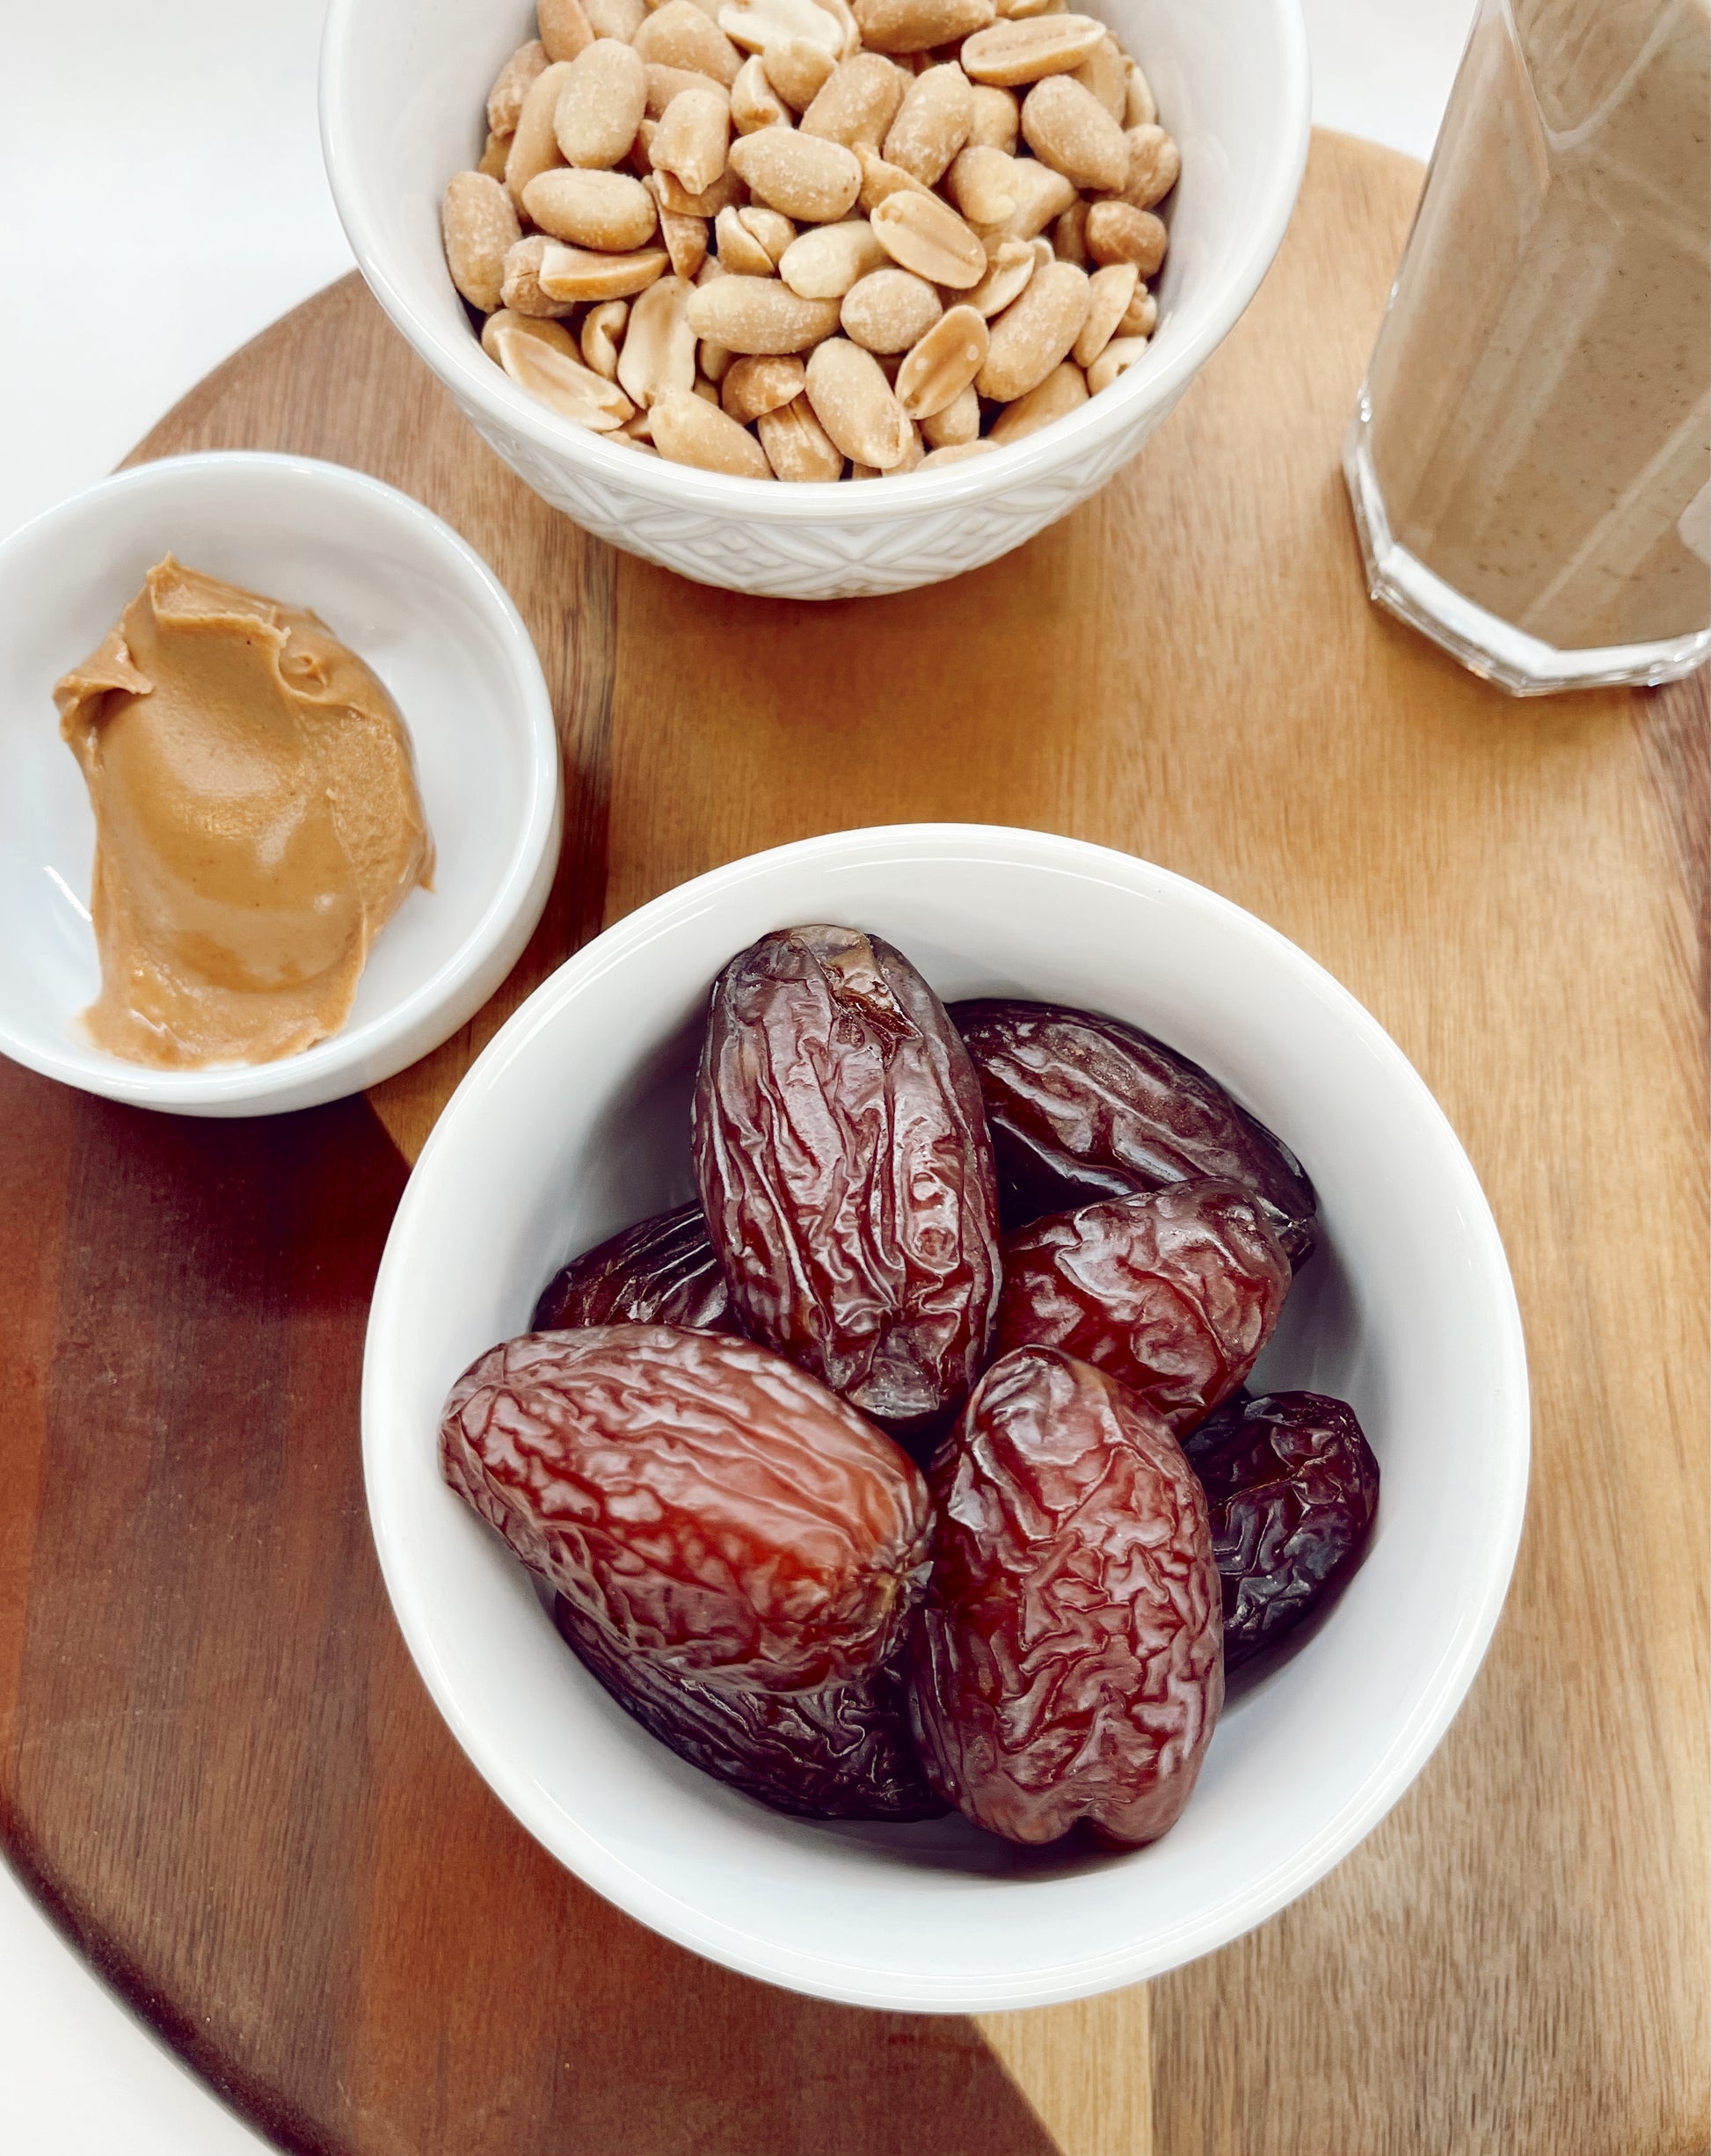 Top view of Jumbo Organic Medjool Dates in a bowl showcasing their size and texture.